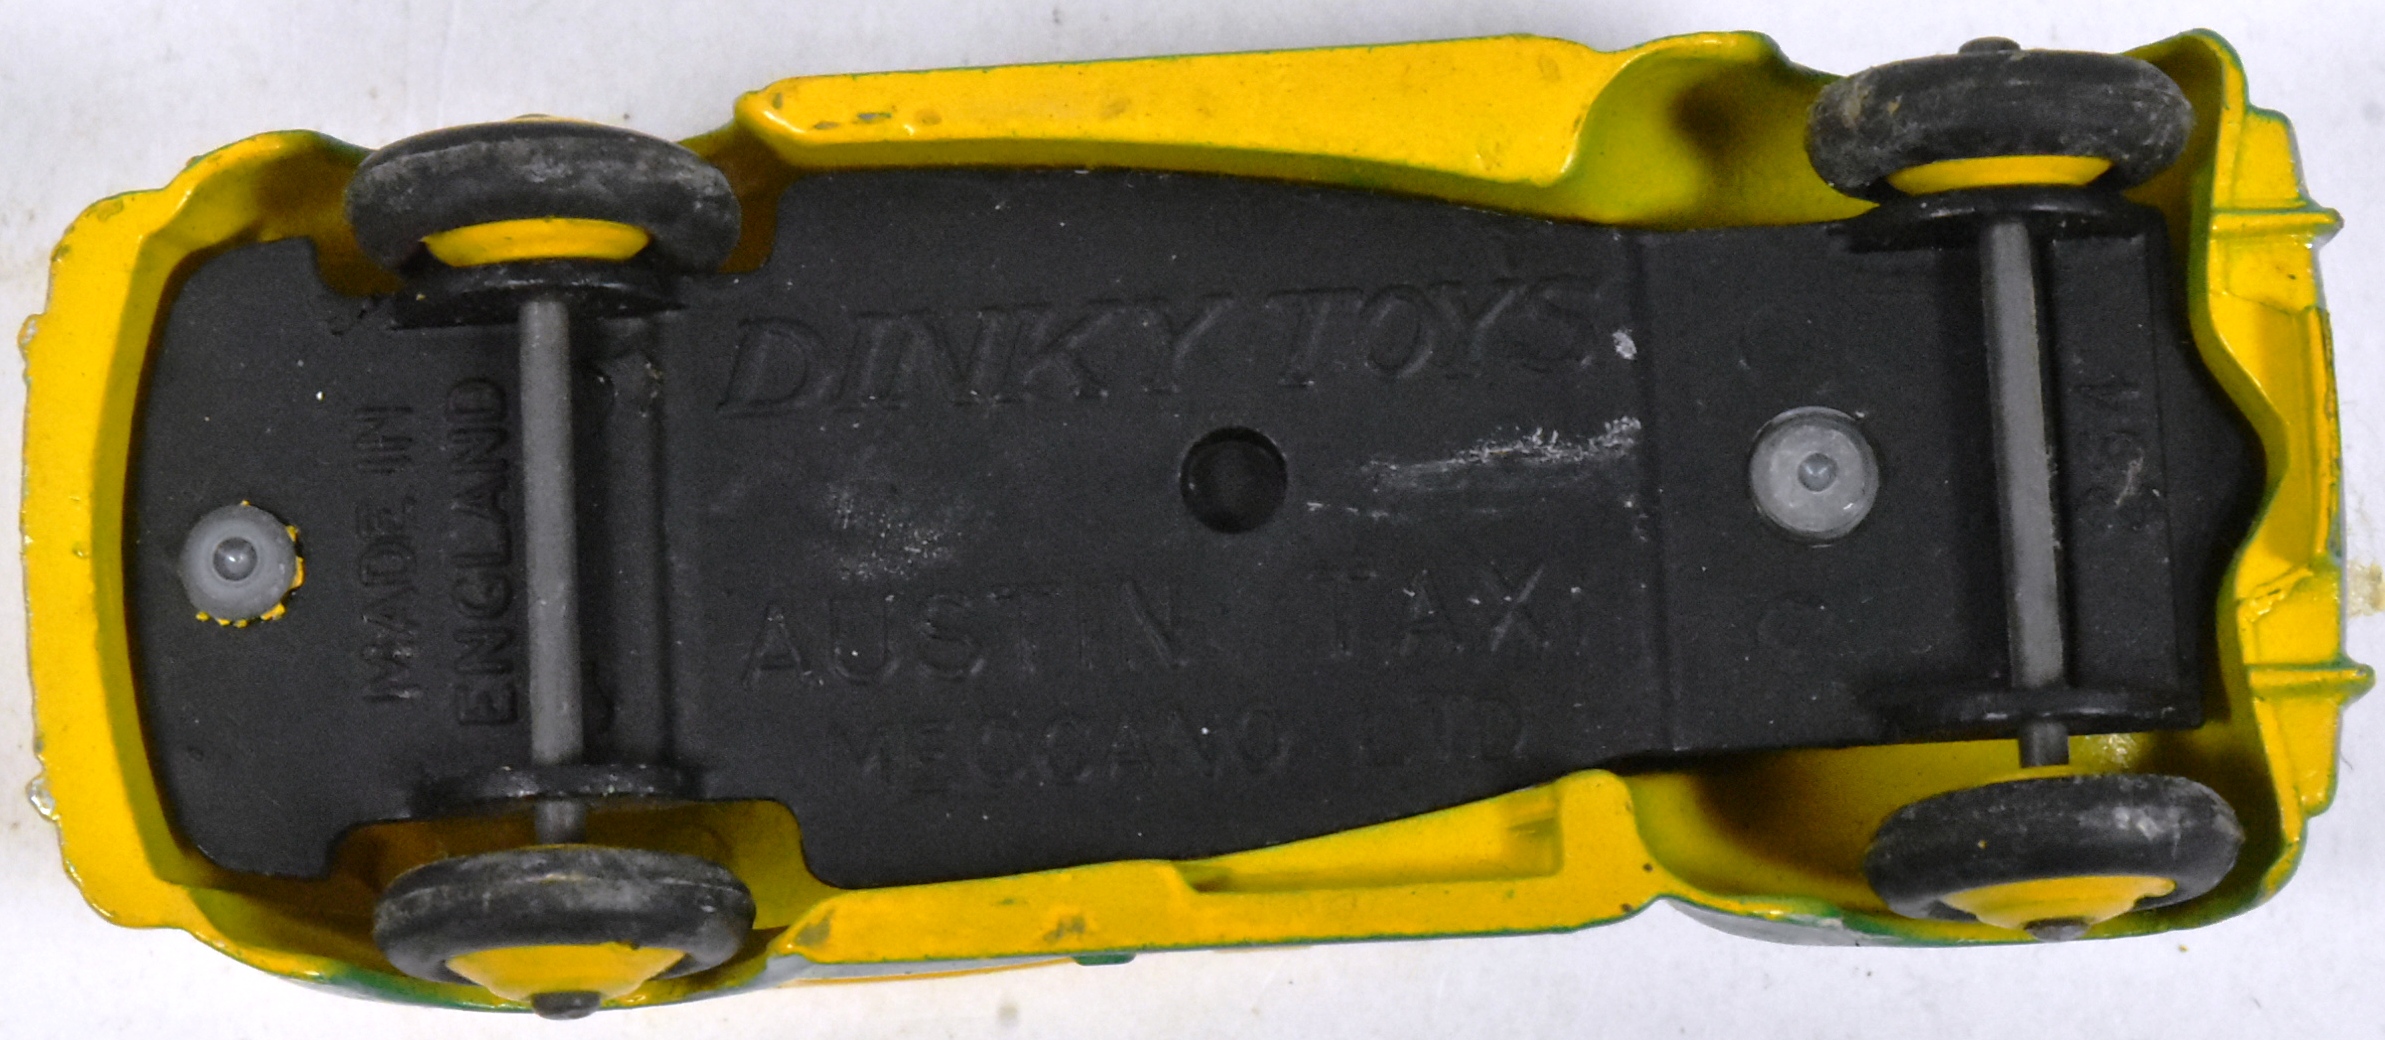 DIECAST - COLLECTION OF VINTAGE DINKY TOYS DIECAST MODELS - Image 6 of 6